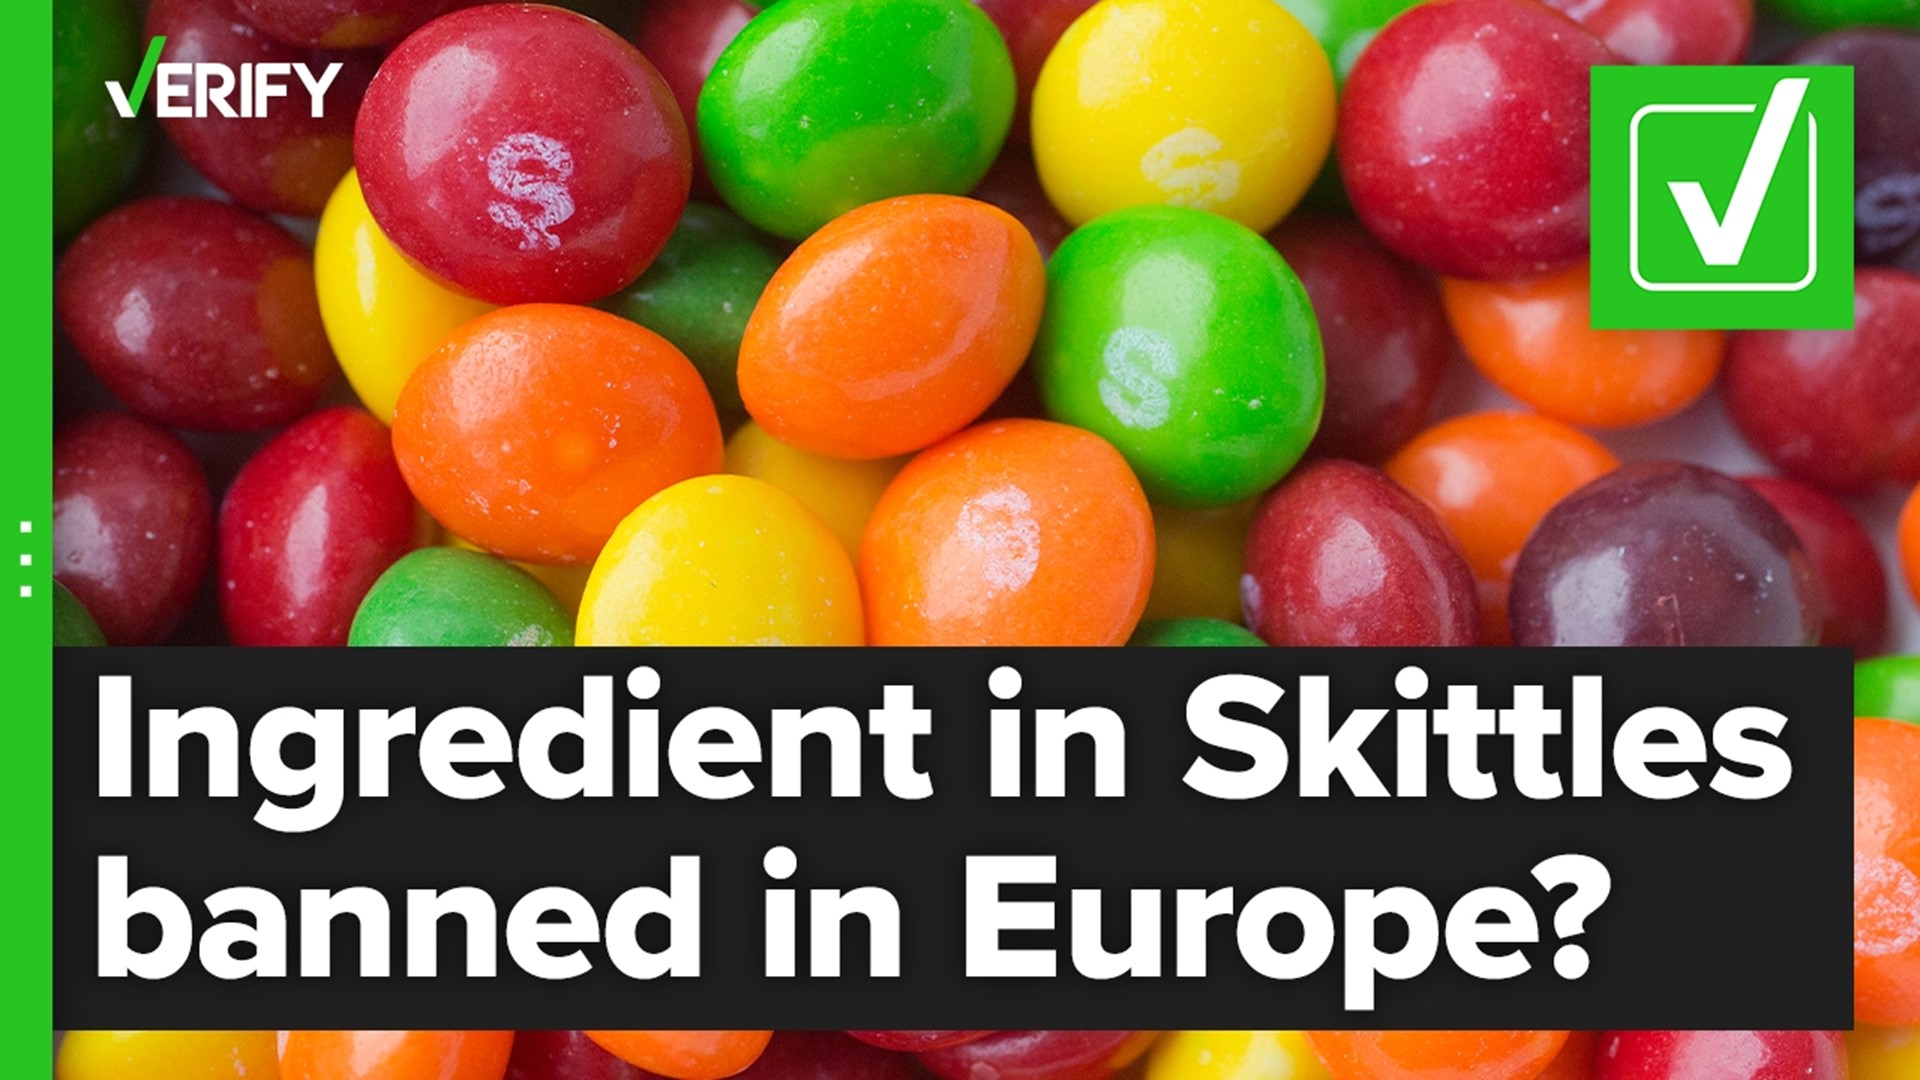 Is titanium dioxide, an ingredient in Skittles, banned in Europe?